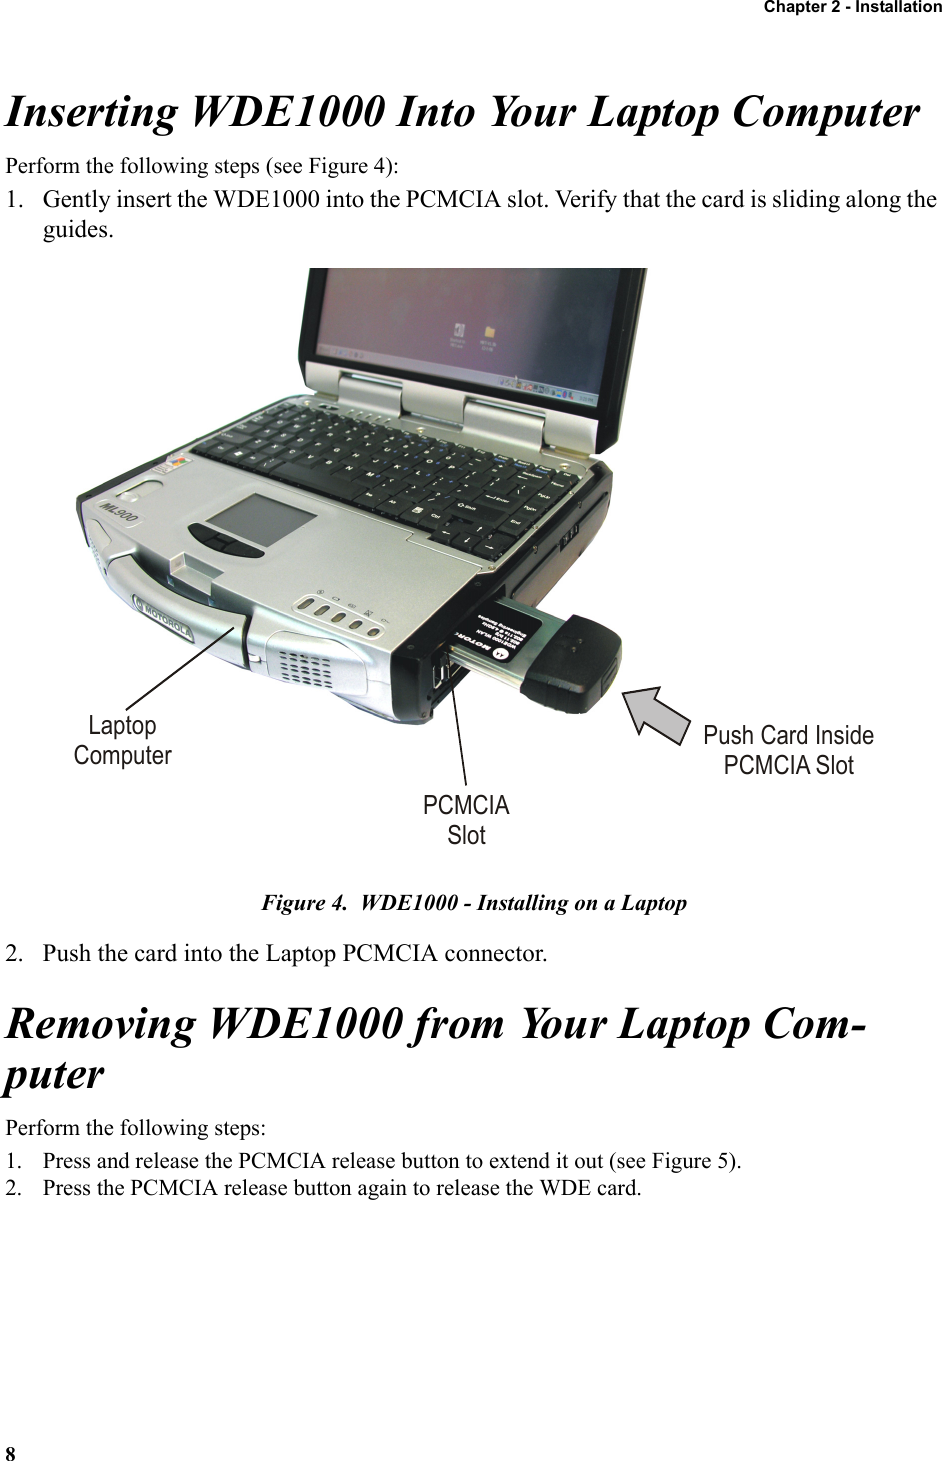 Chapter 2 - Installation8Inserting WDE1000 Into Your Laptop ComputerPerform the following steps (see Figure 4):1. Gently insert the WDE1000 into the PCMCIA slot. Verify that the card is sliding along the guides.Figure 4.  WDE1000 - Installing on a Laptop2. Push the card into the Laptop PCMCIA connector.Removing WDE1000 from Your Laptop Com-puterPerform the following steps:1. Press and release the PCMCIA release button to extend it out (see Figure 5).2. Press the PCMCIA release button again to release the WDE card.LaptopComputerPCMCIASlotPush Card InsidePCMCIA Slot